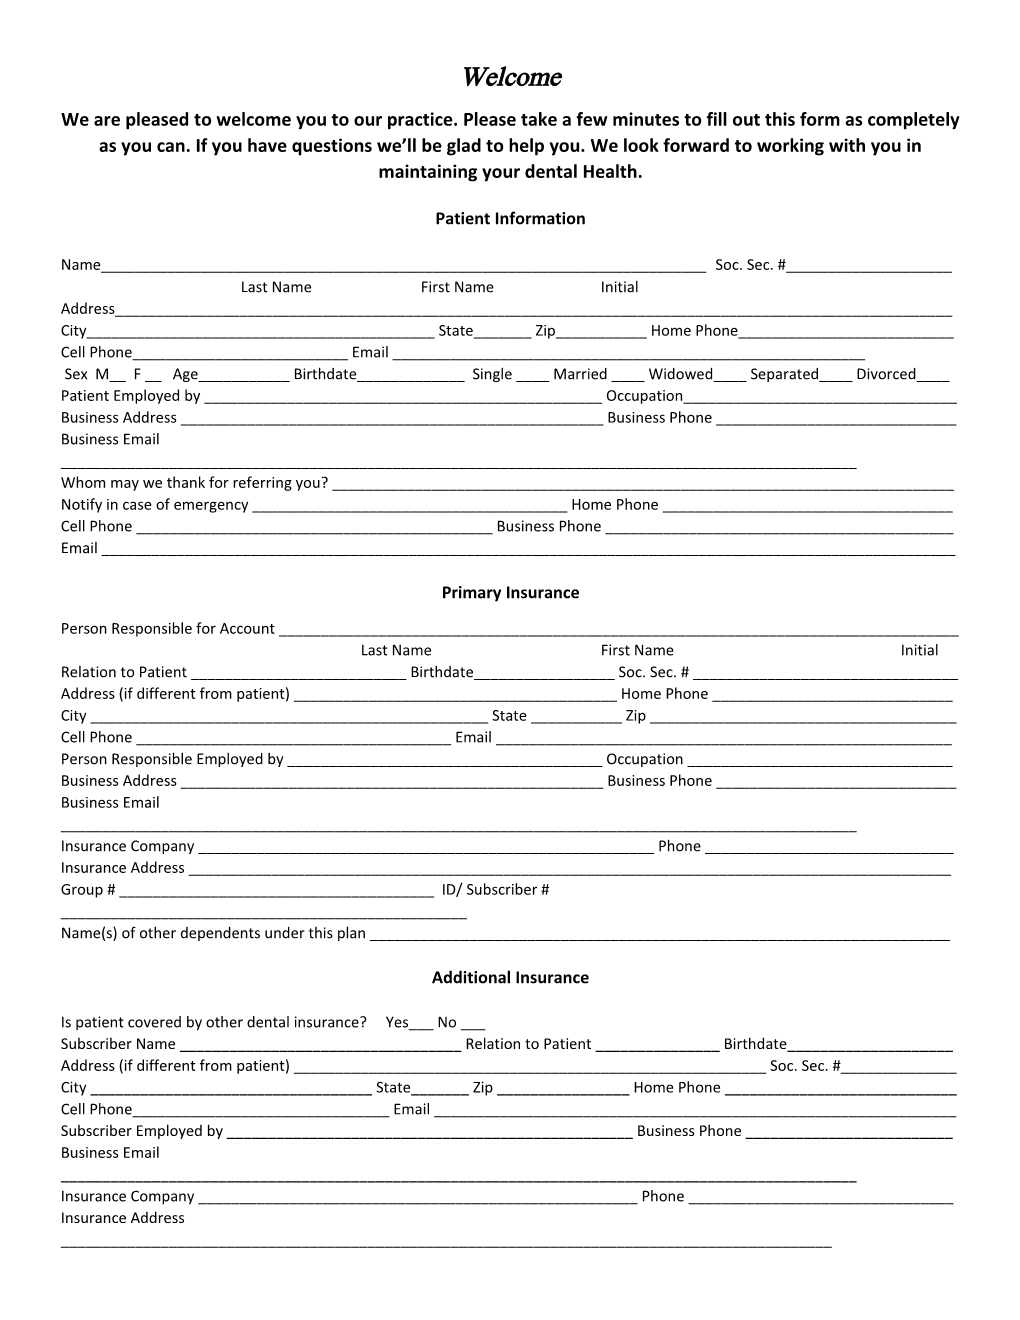 We Are Pleased to Welcome You to Our Practice. Please Take a Few Minutes to Fill out This